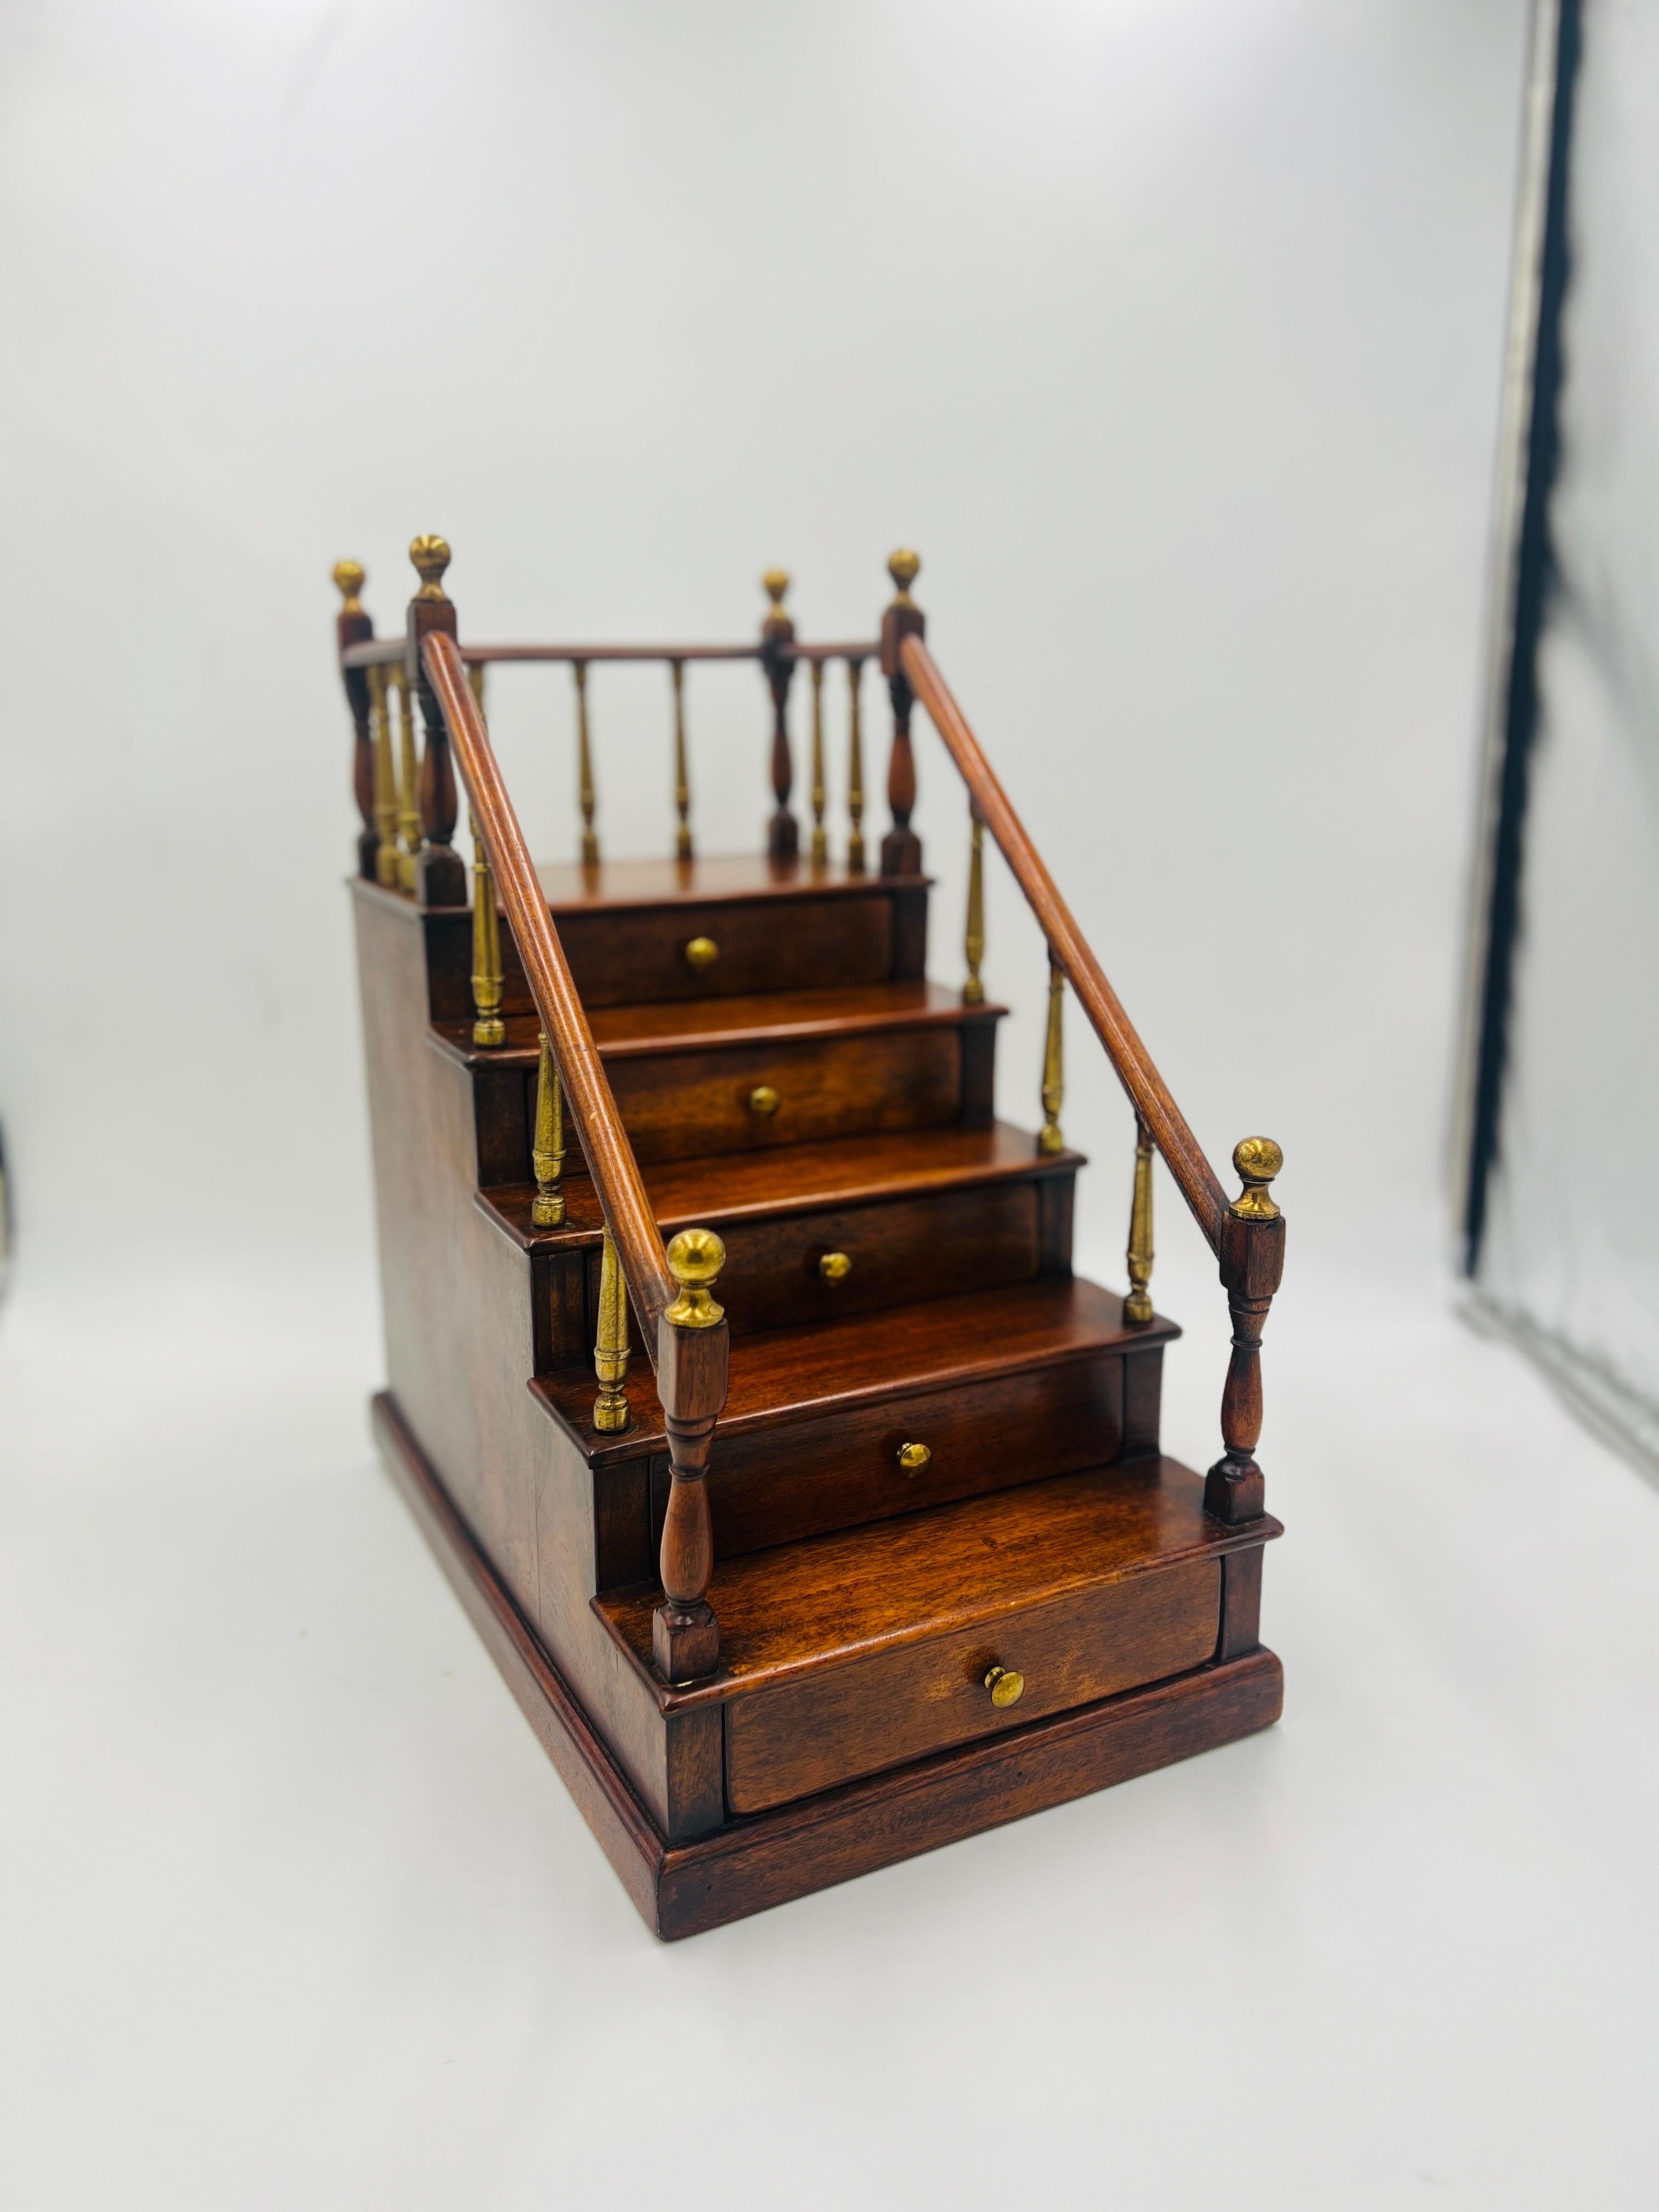 Antique English cabinet made mahogany staircase model. The model features a 5 step design with railing across the sides. Each railing accented by a brass finial. The 5 drawers each slide easily and have brass pulls. No apparent makers mark.